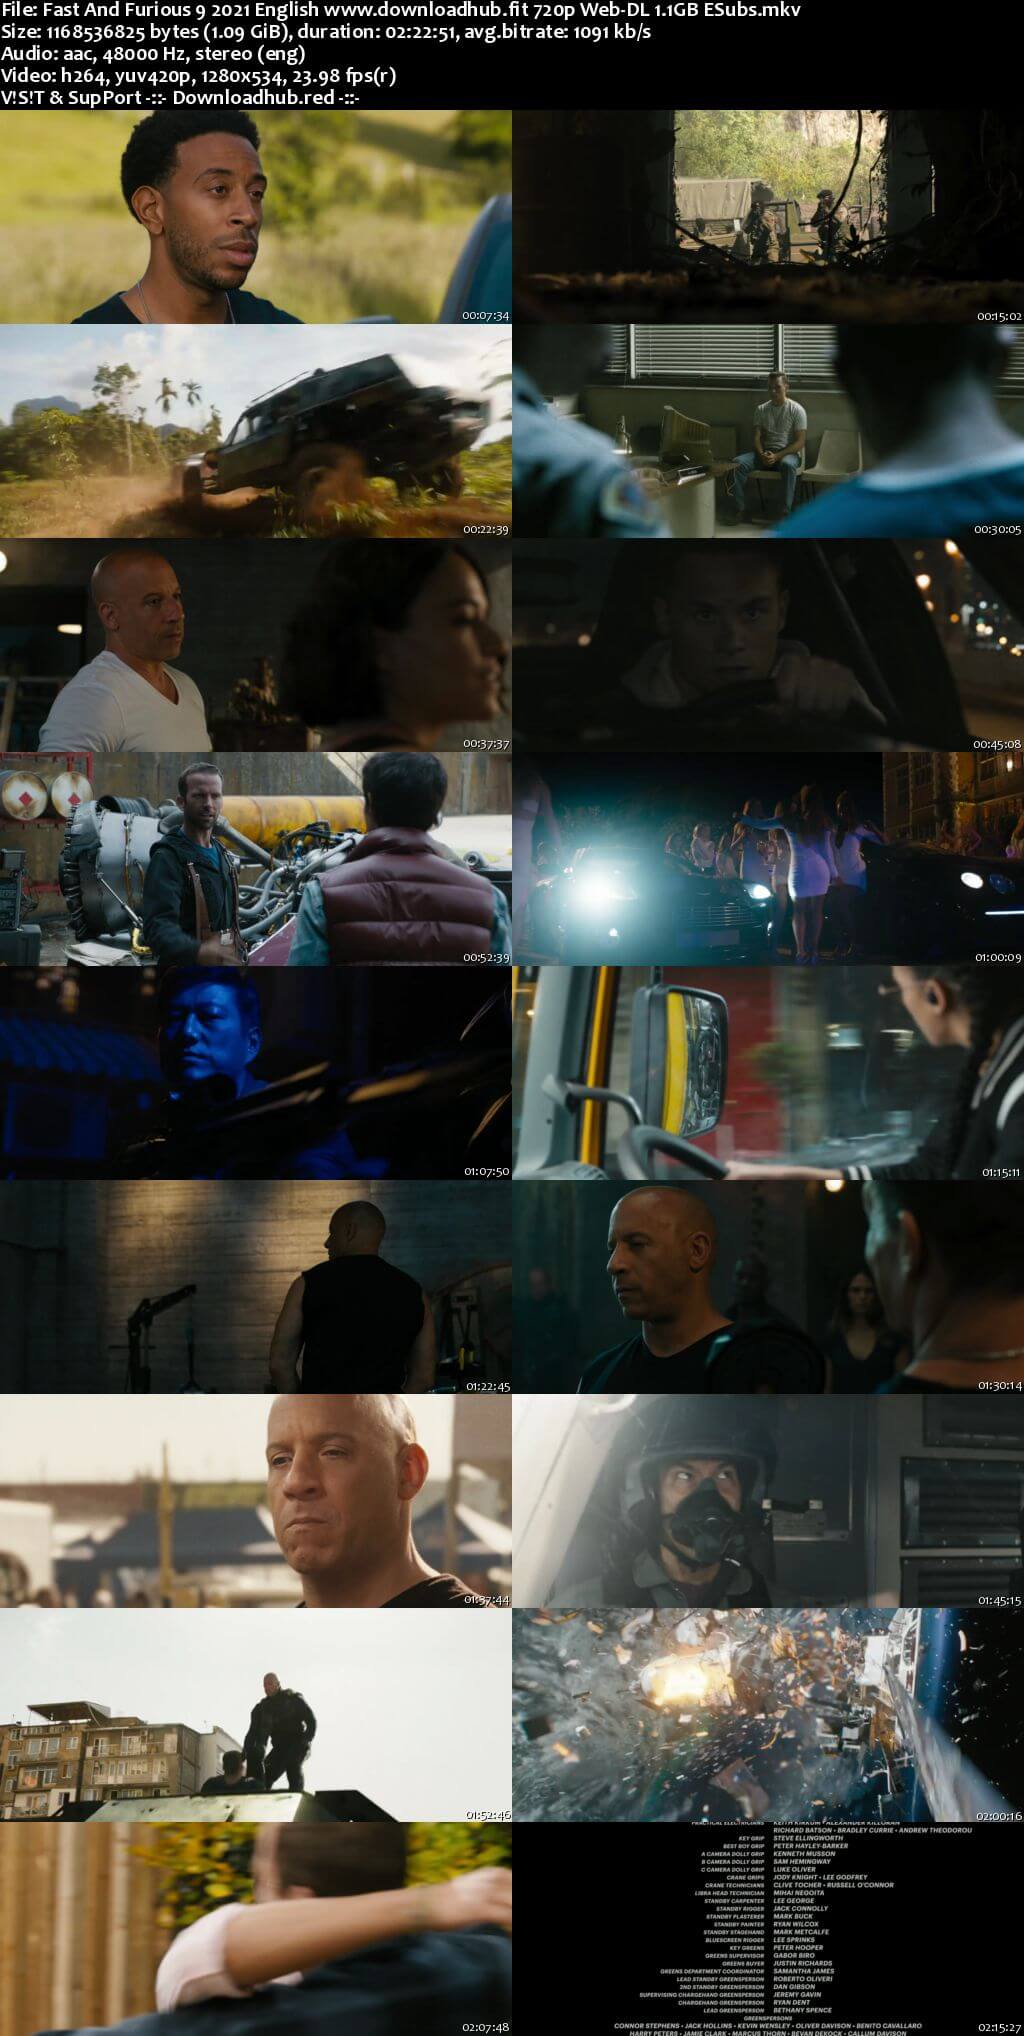 Fast And Furious 9 2021 English 720p Web-DL 1.1GB ESubs